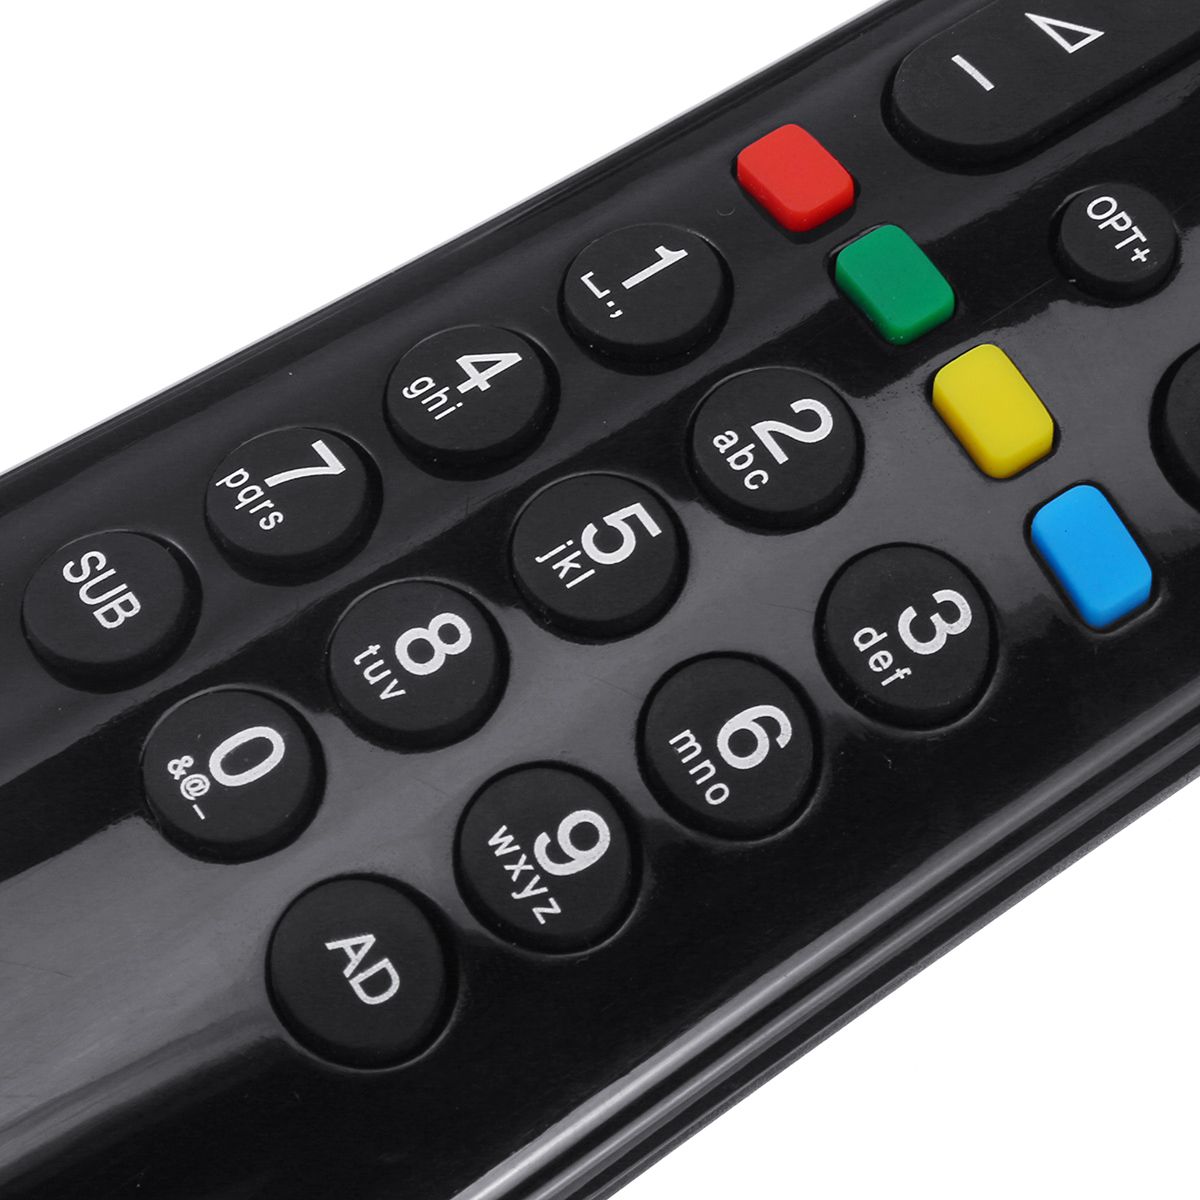 RC3902-Replacement-TV-Remote-Control-for-Humax-RM-I08U-HDR-1000S1100-TV-1688862